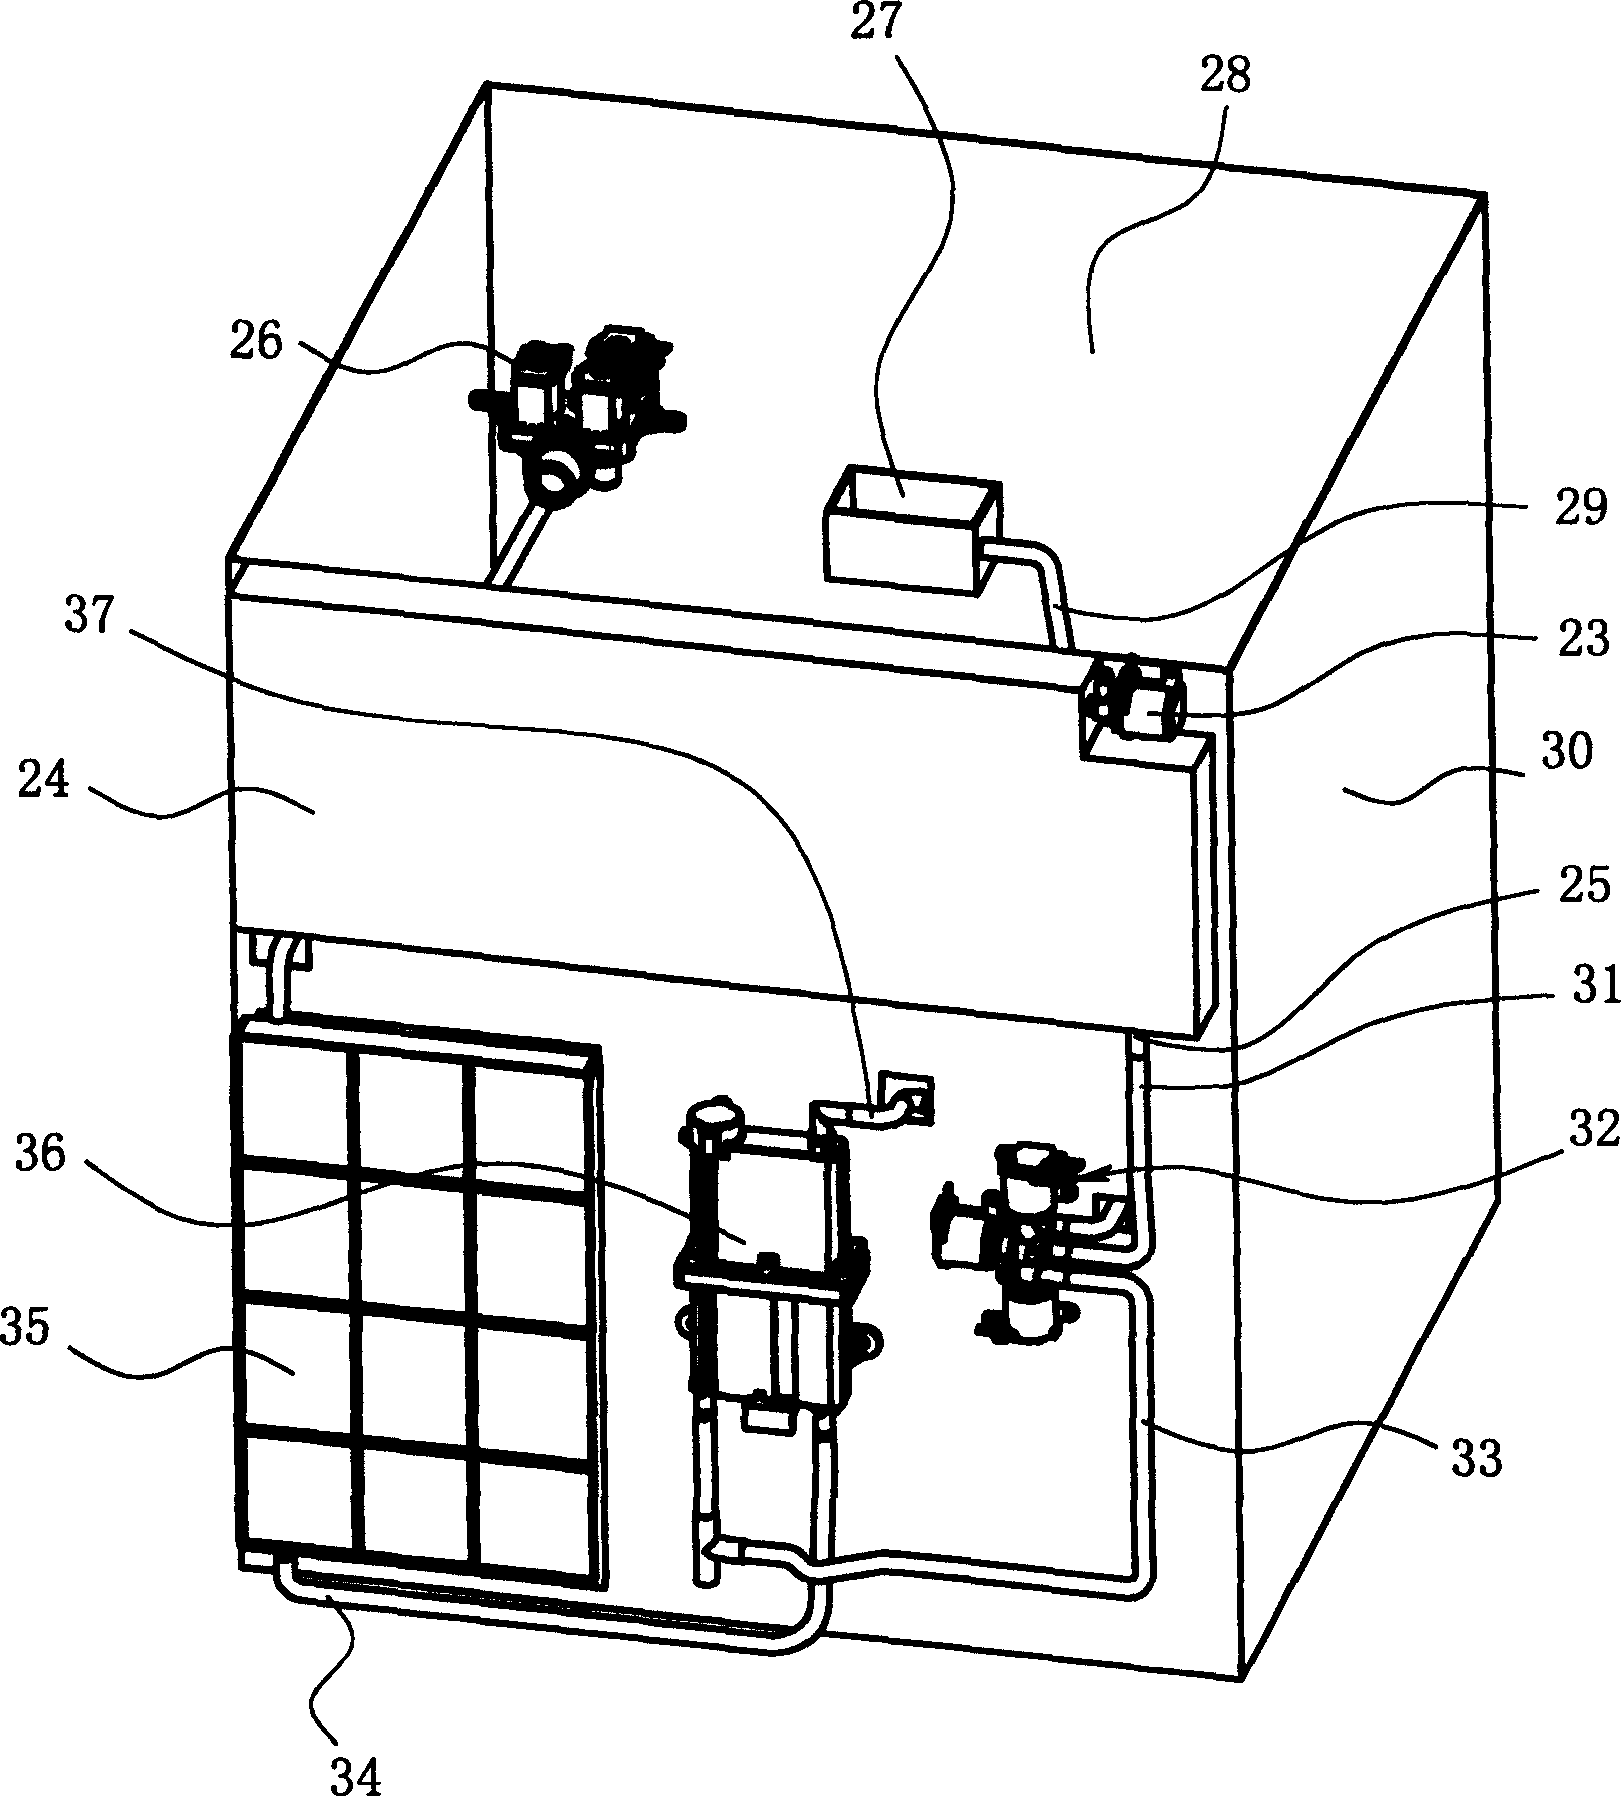 Electrical washing machine with electrobath being installed